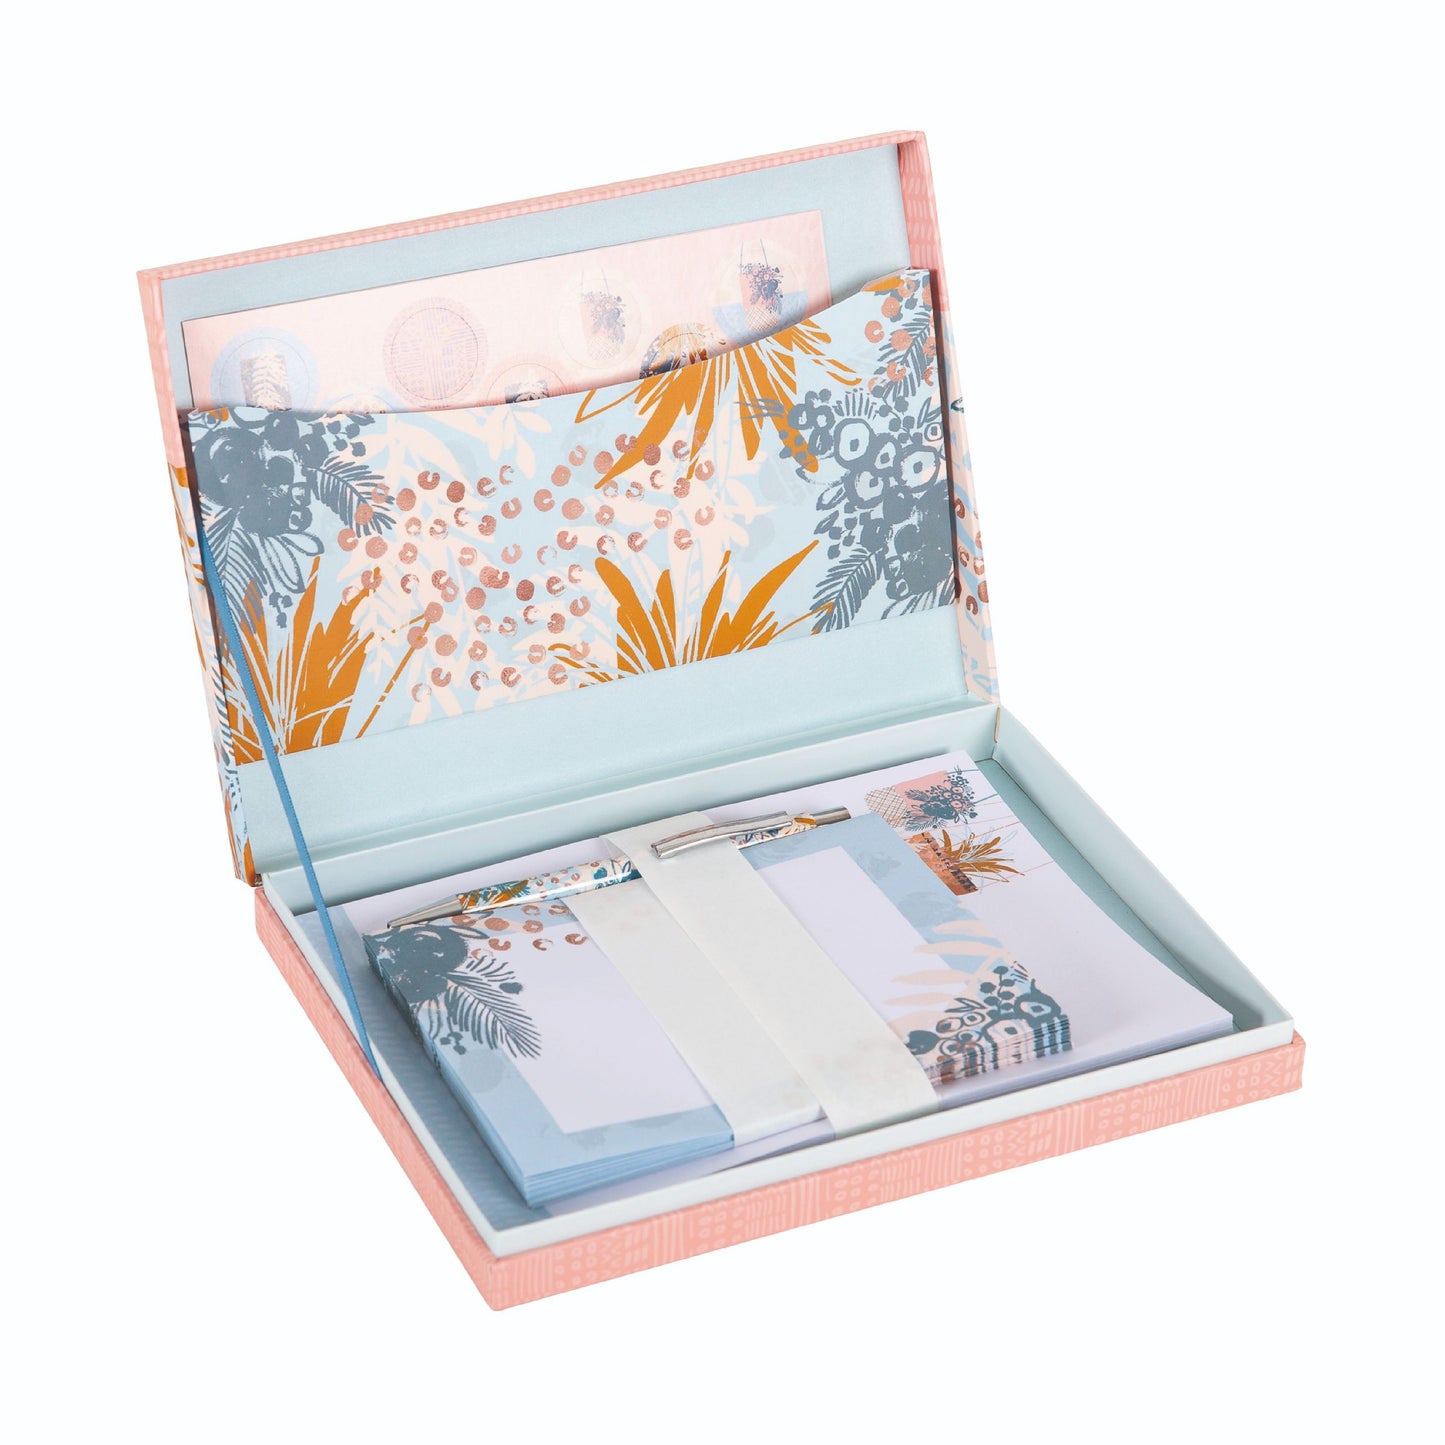 Gifted Stationery Bohemian Letter Writing Set Contains Pen, Paper & Envelopes